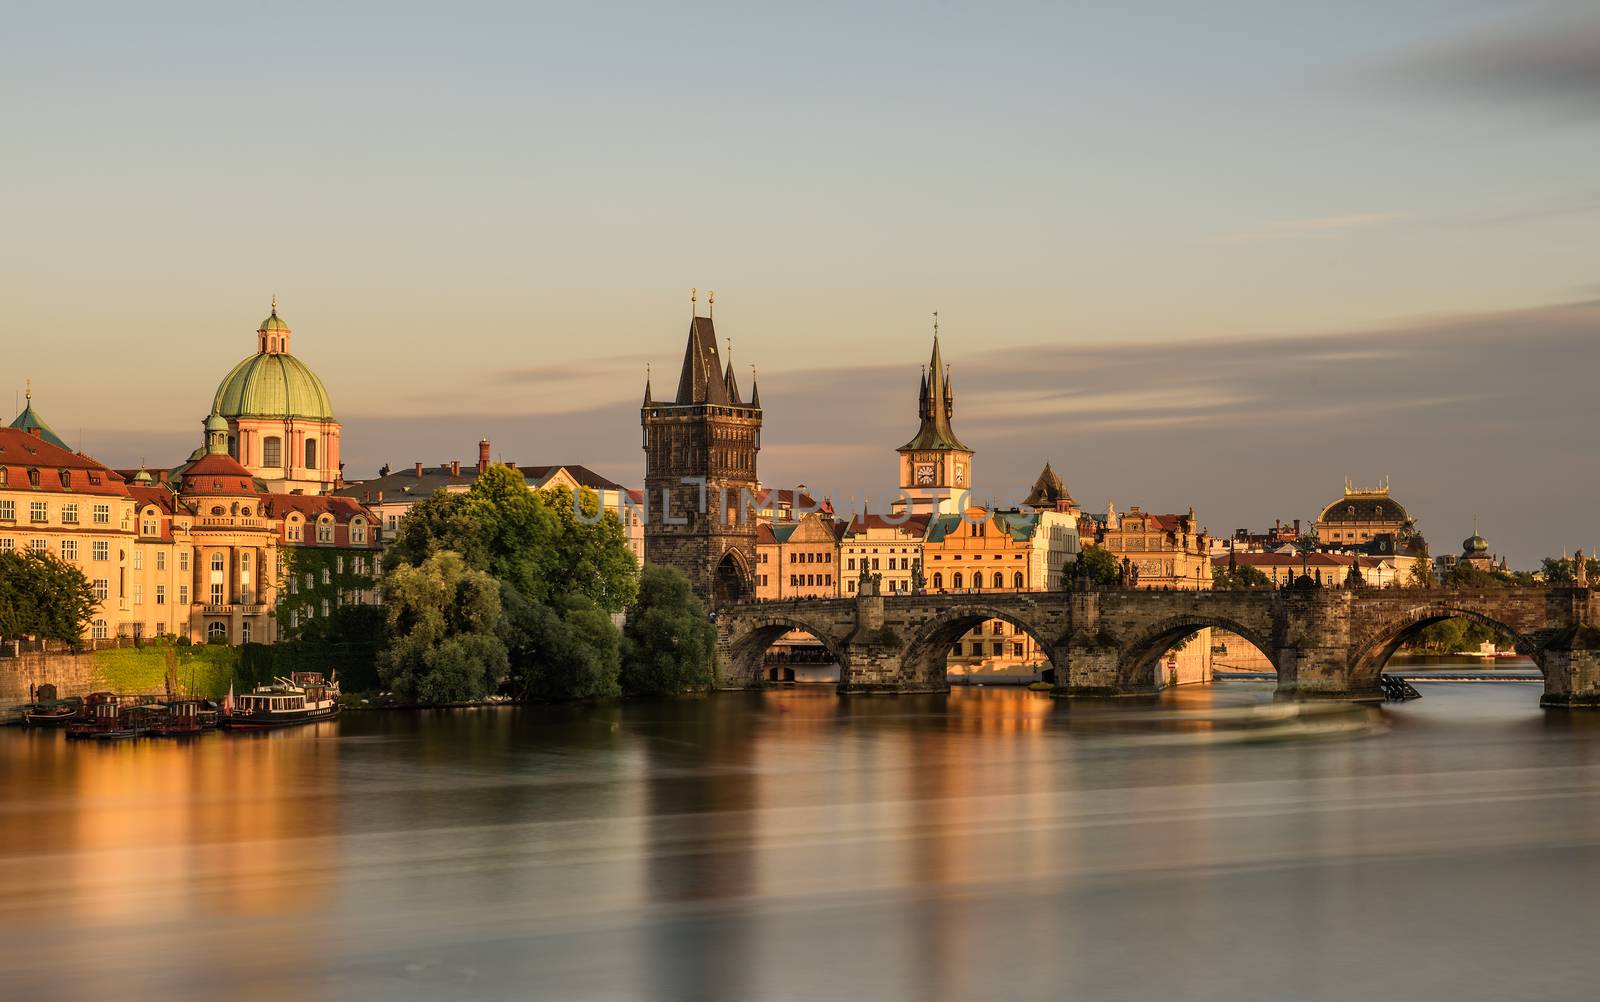 Charles bridge in the old town of Prague at sunset. Long exposure.